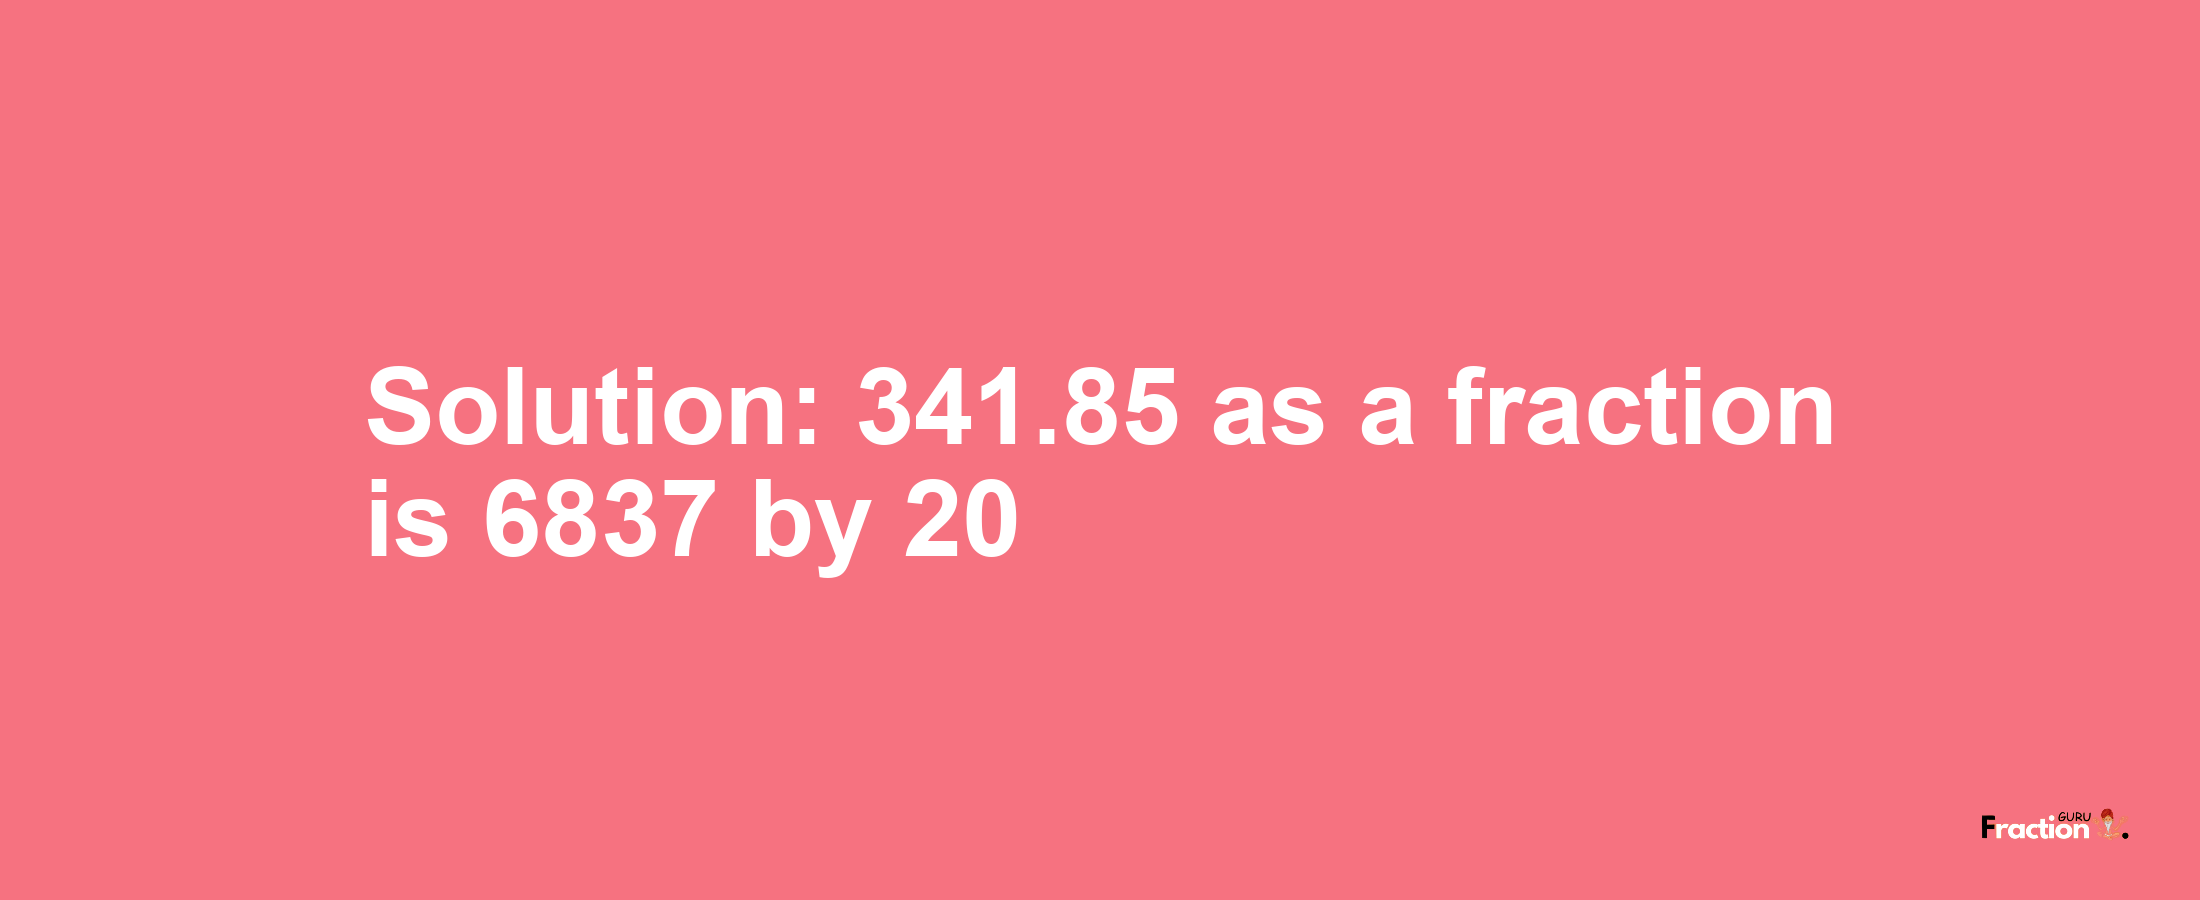 Solution:341.85 as a fraction is 6837/20